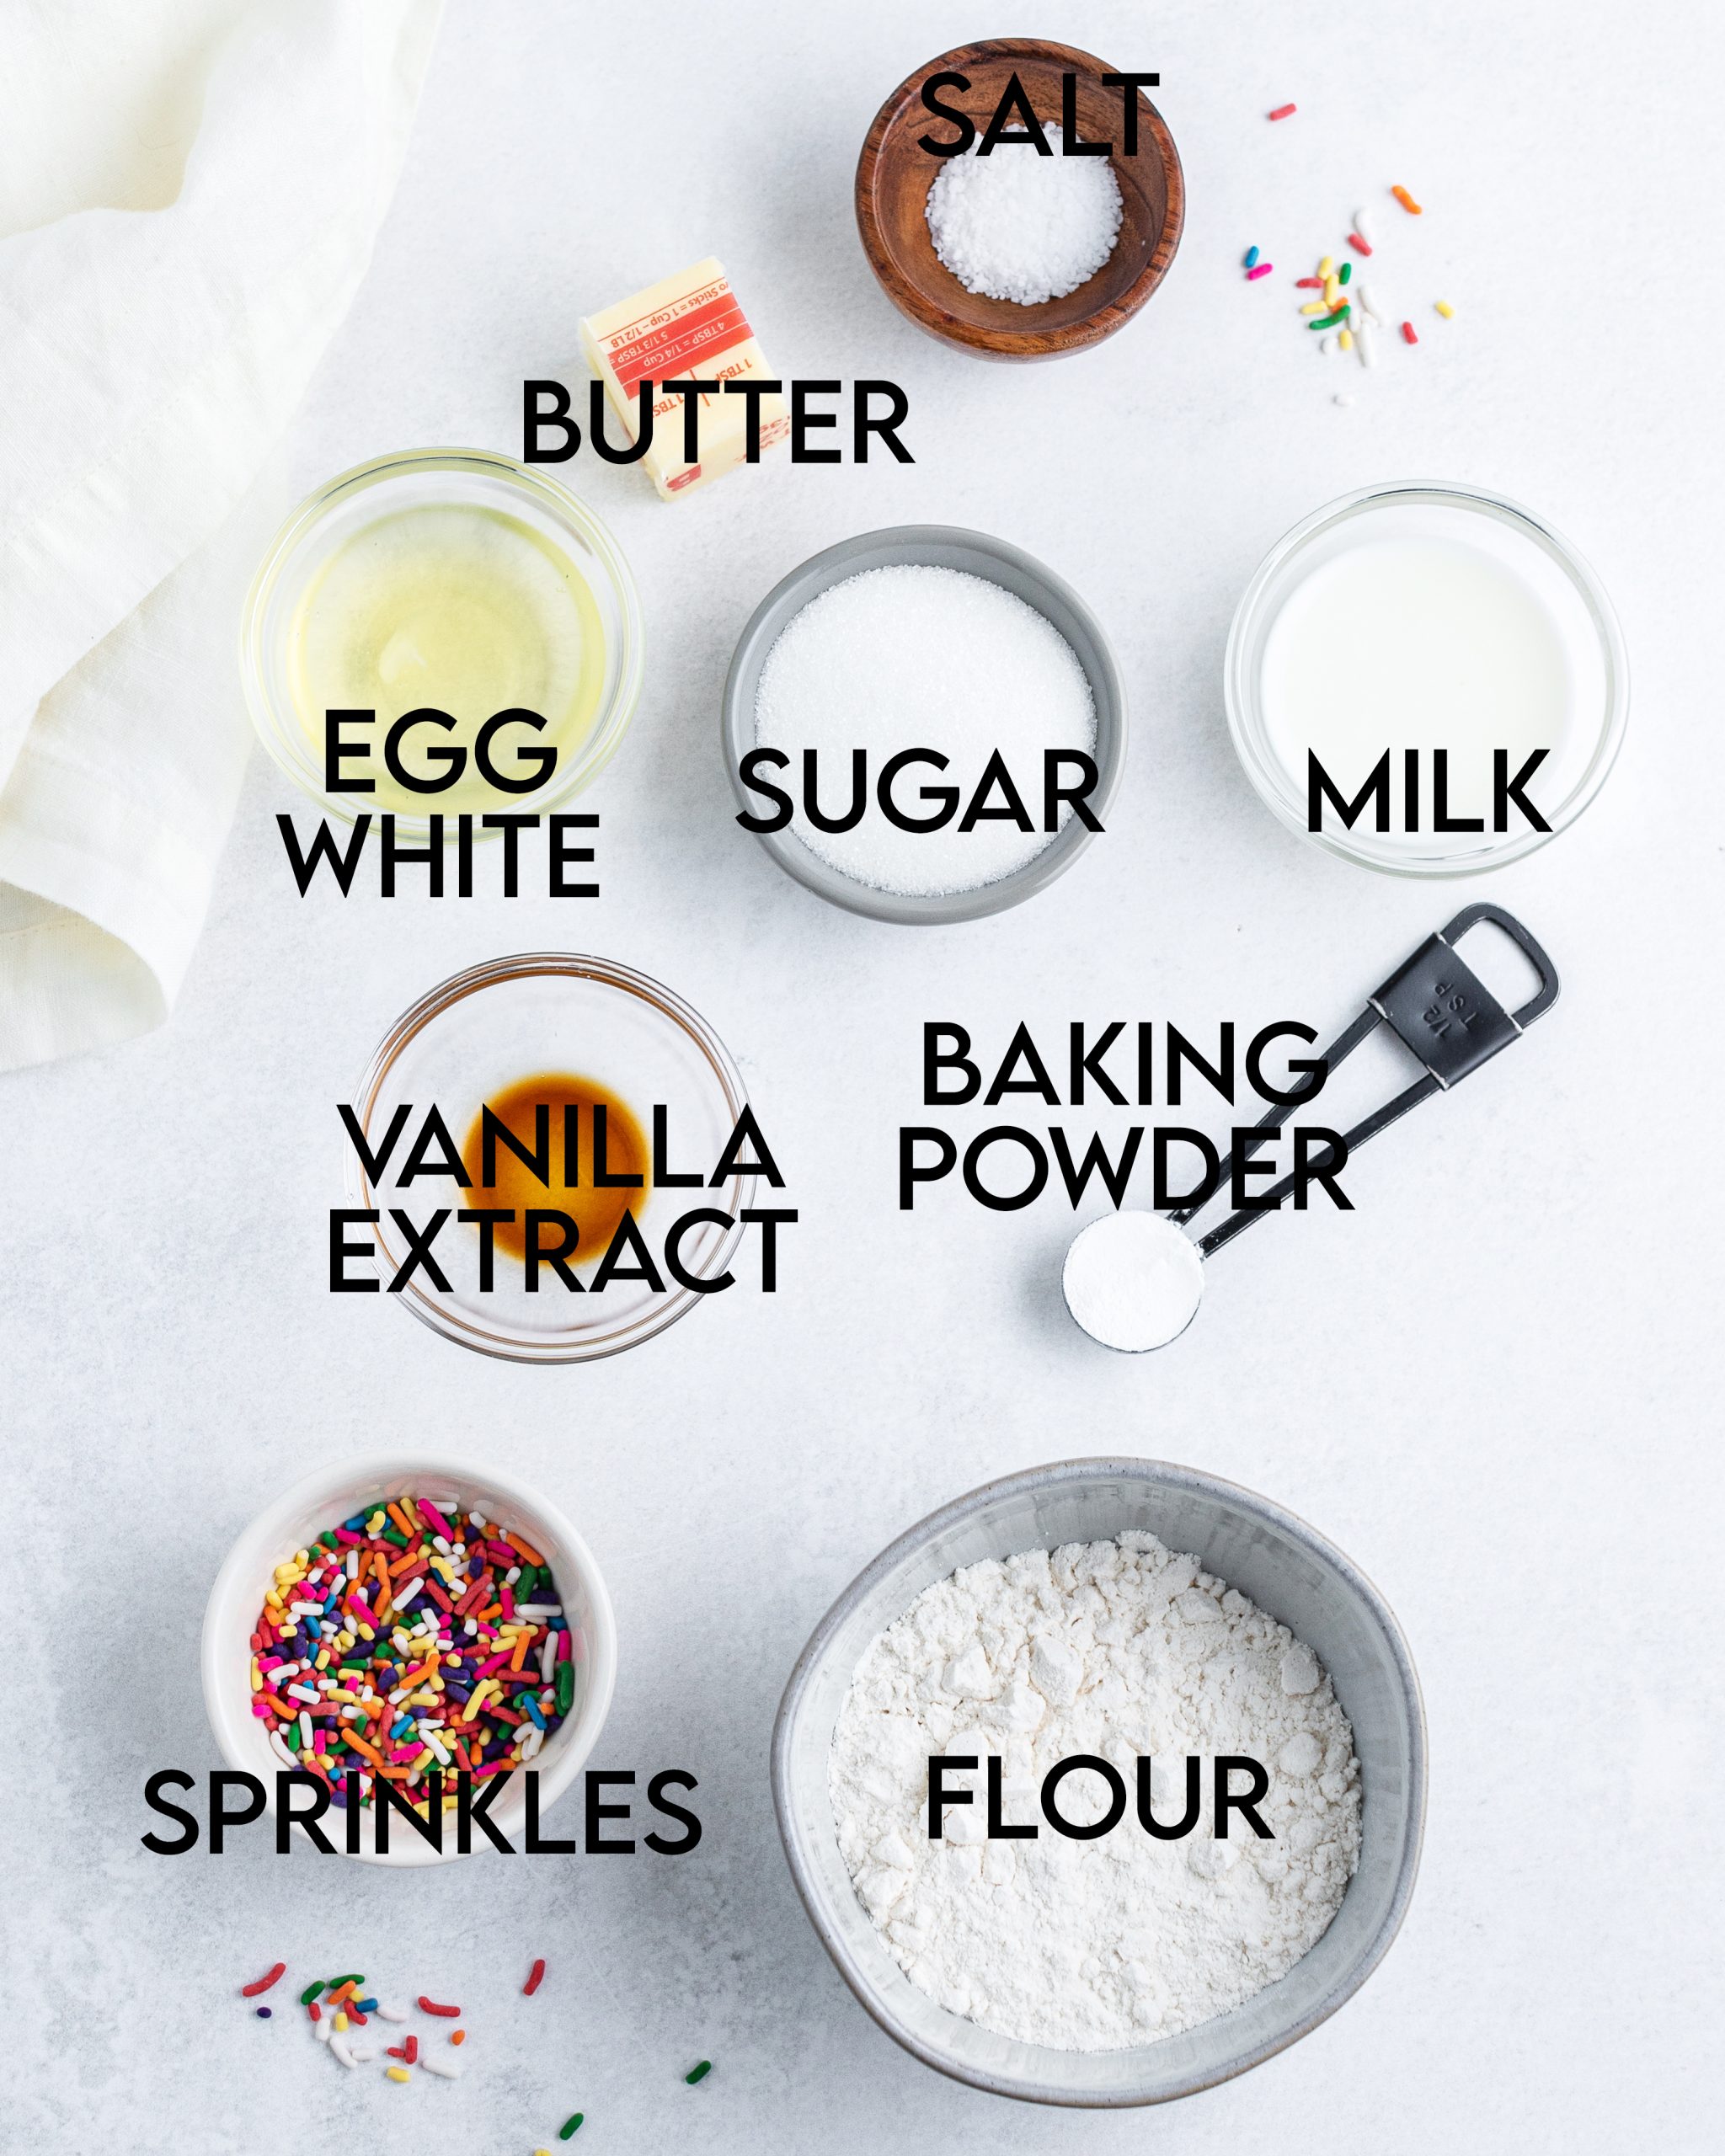 Labeled ingredients needed to make funfetti cupcakes.